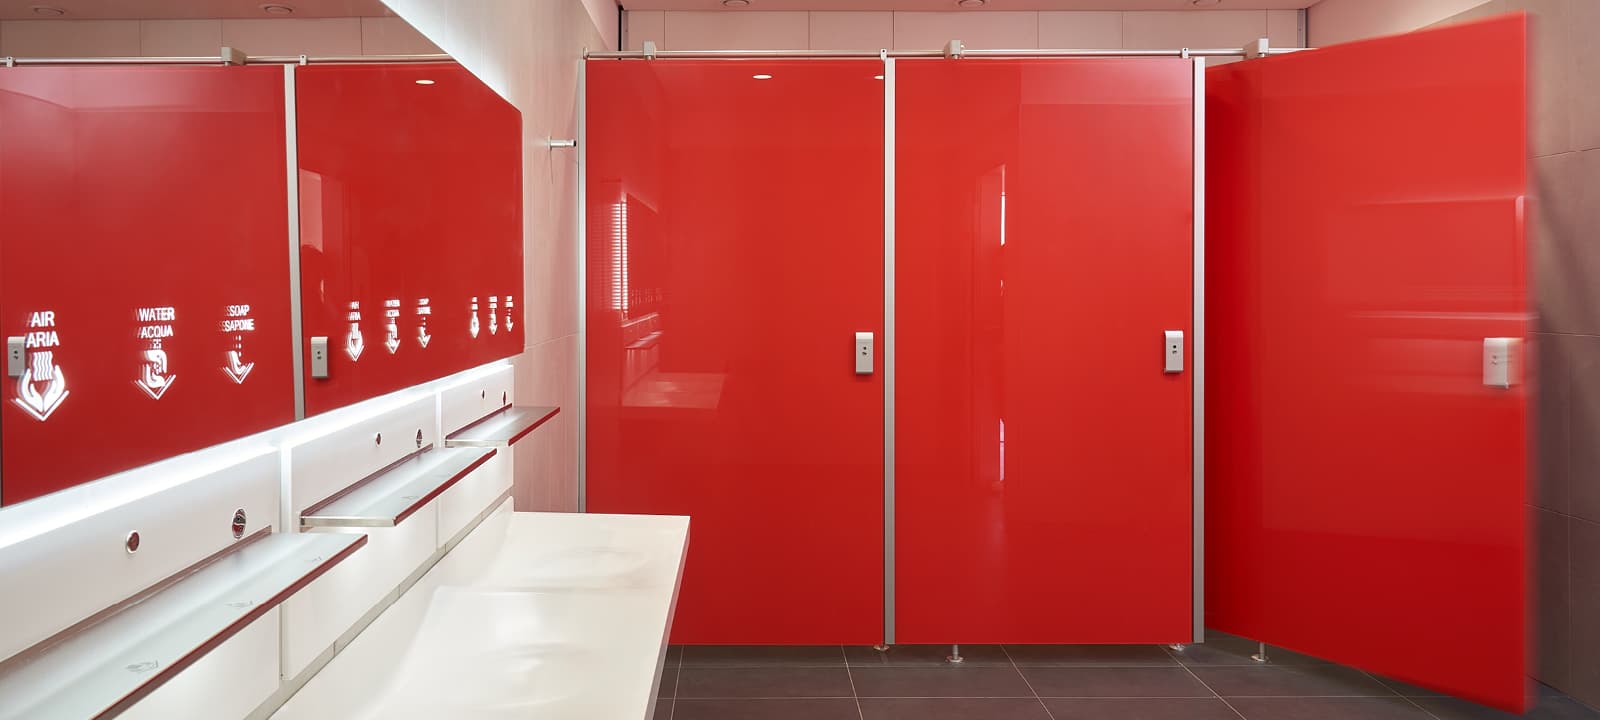 Hygiene in highly-frequented commercial bathrooms